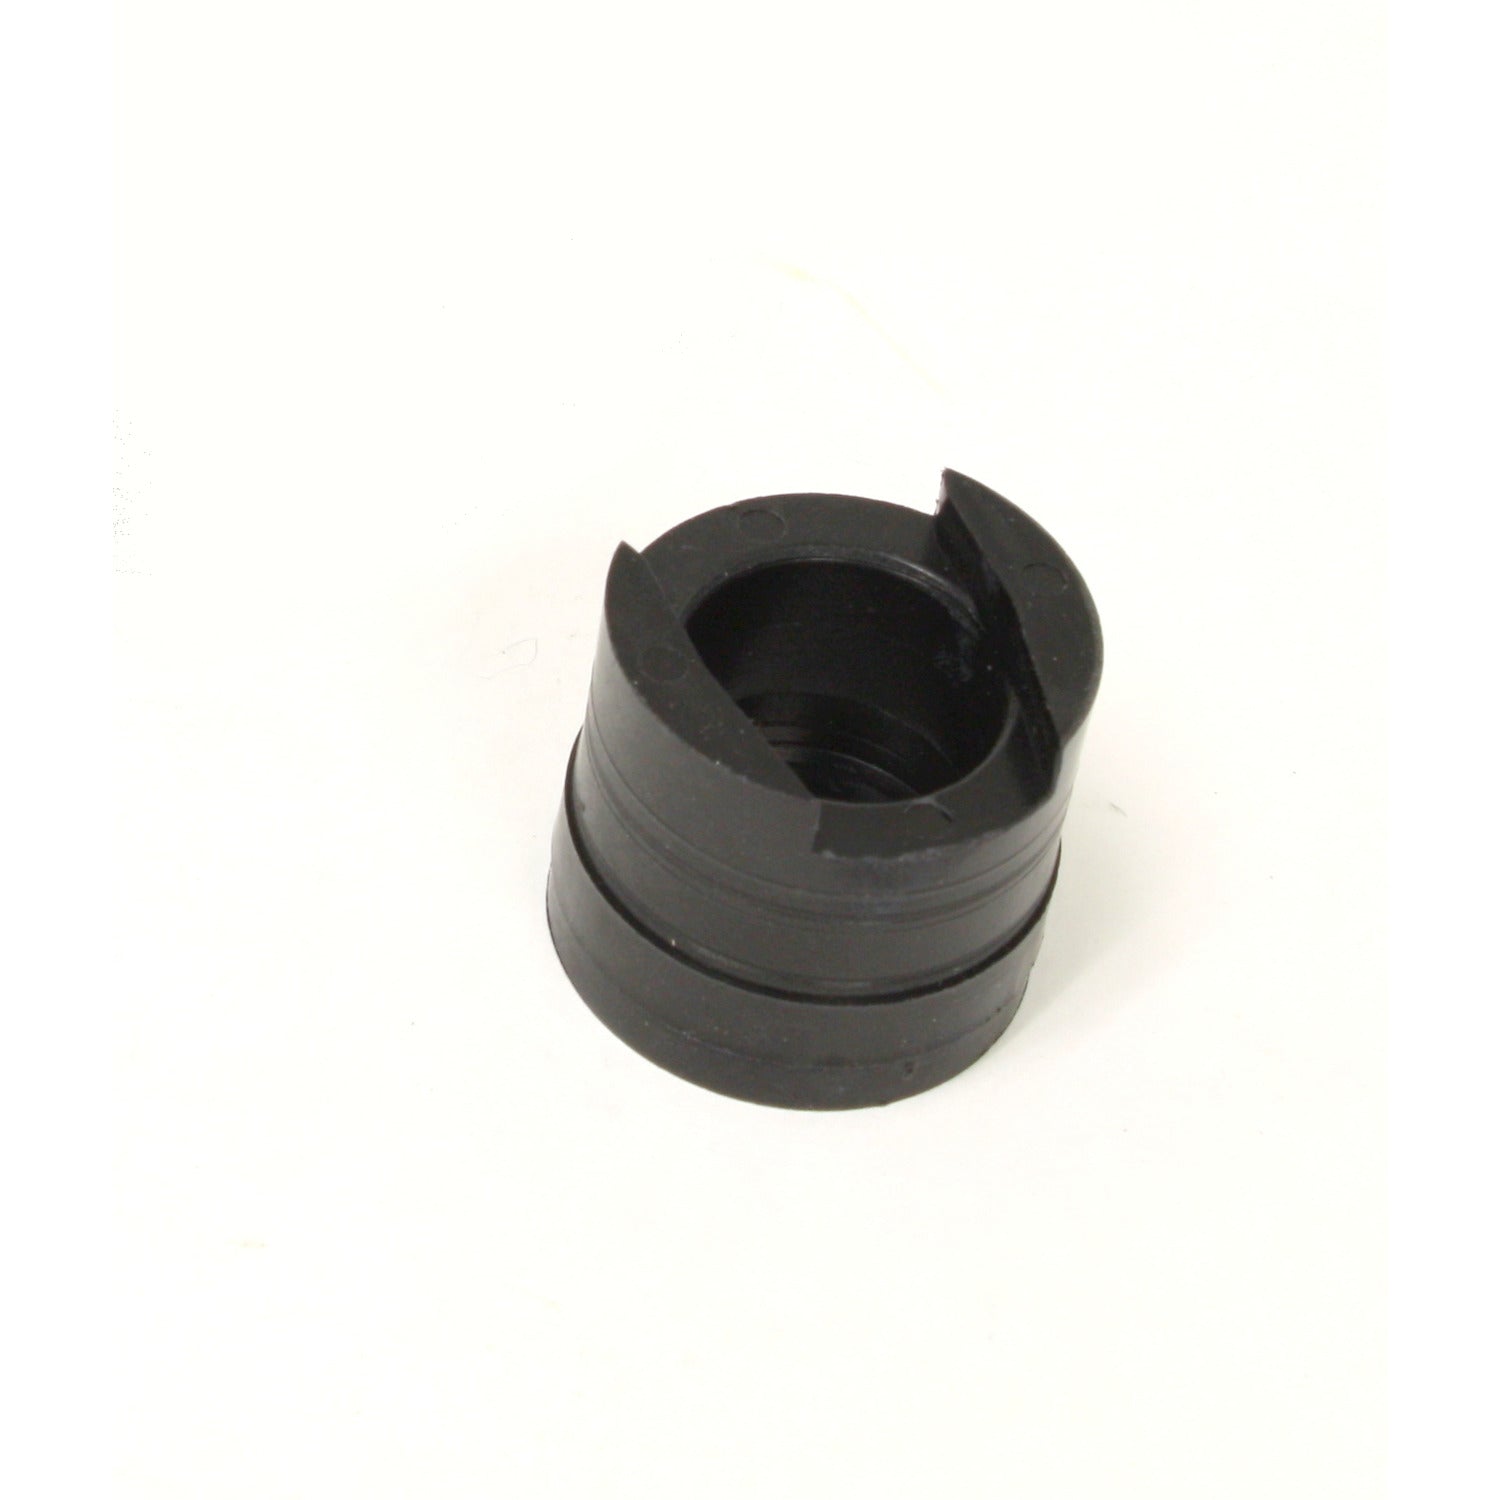 PerTronix 1563B3 Magnet Sleeve (only) for 1563B Ignitor Kit